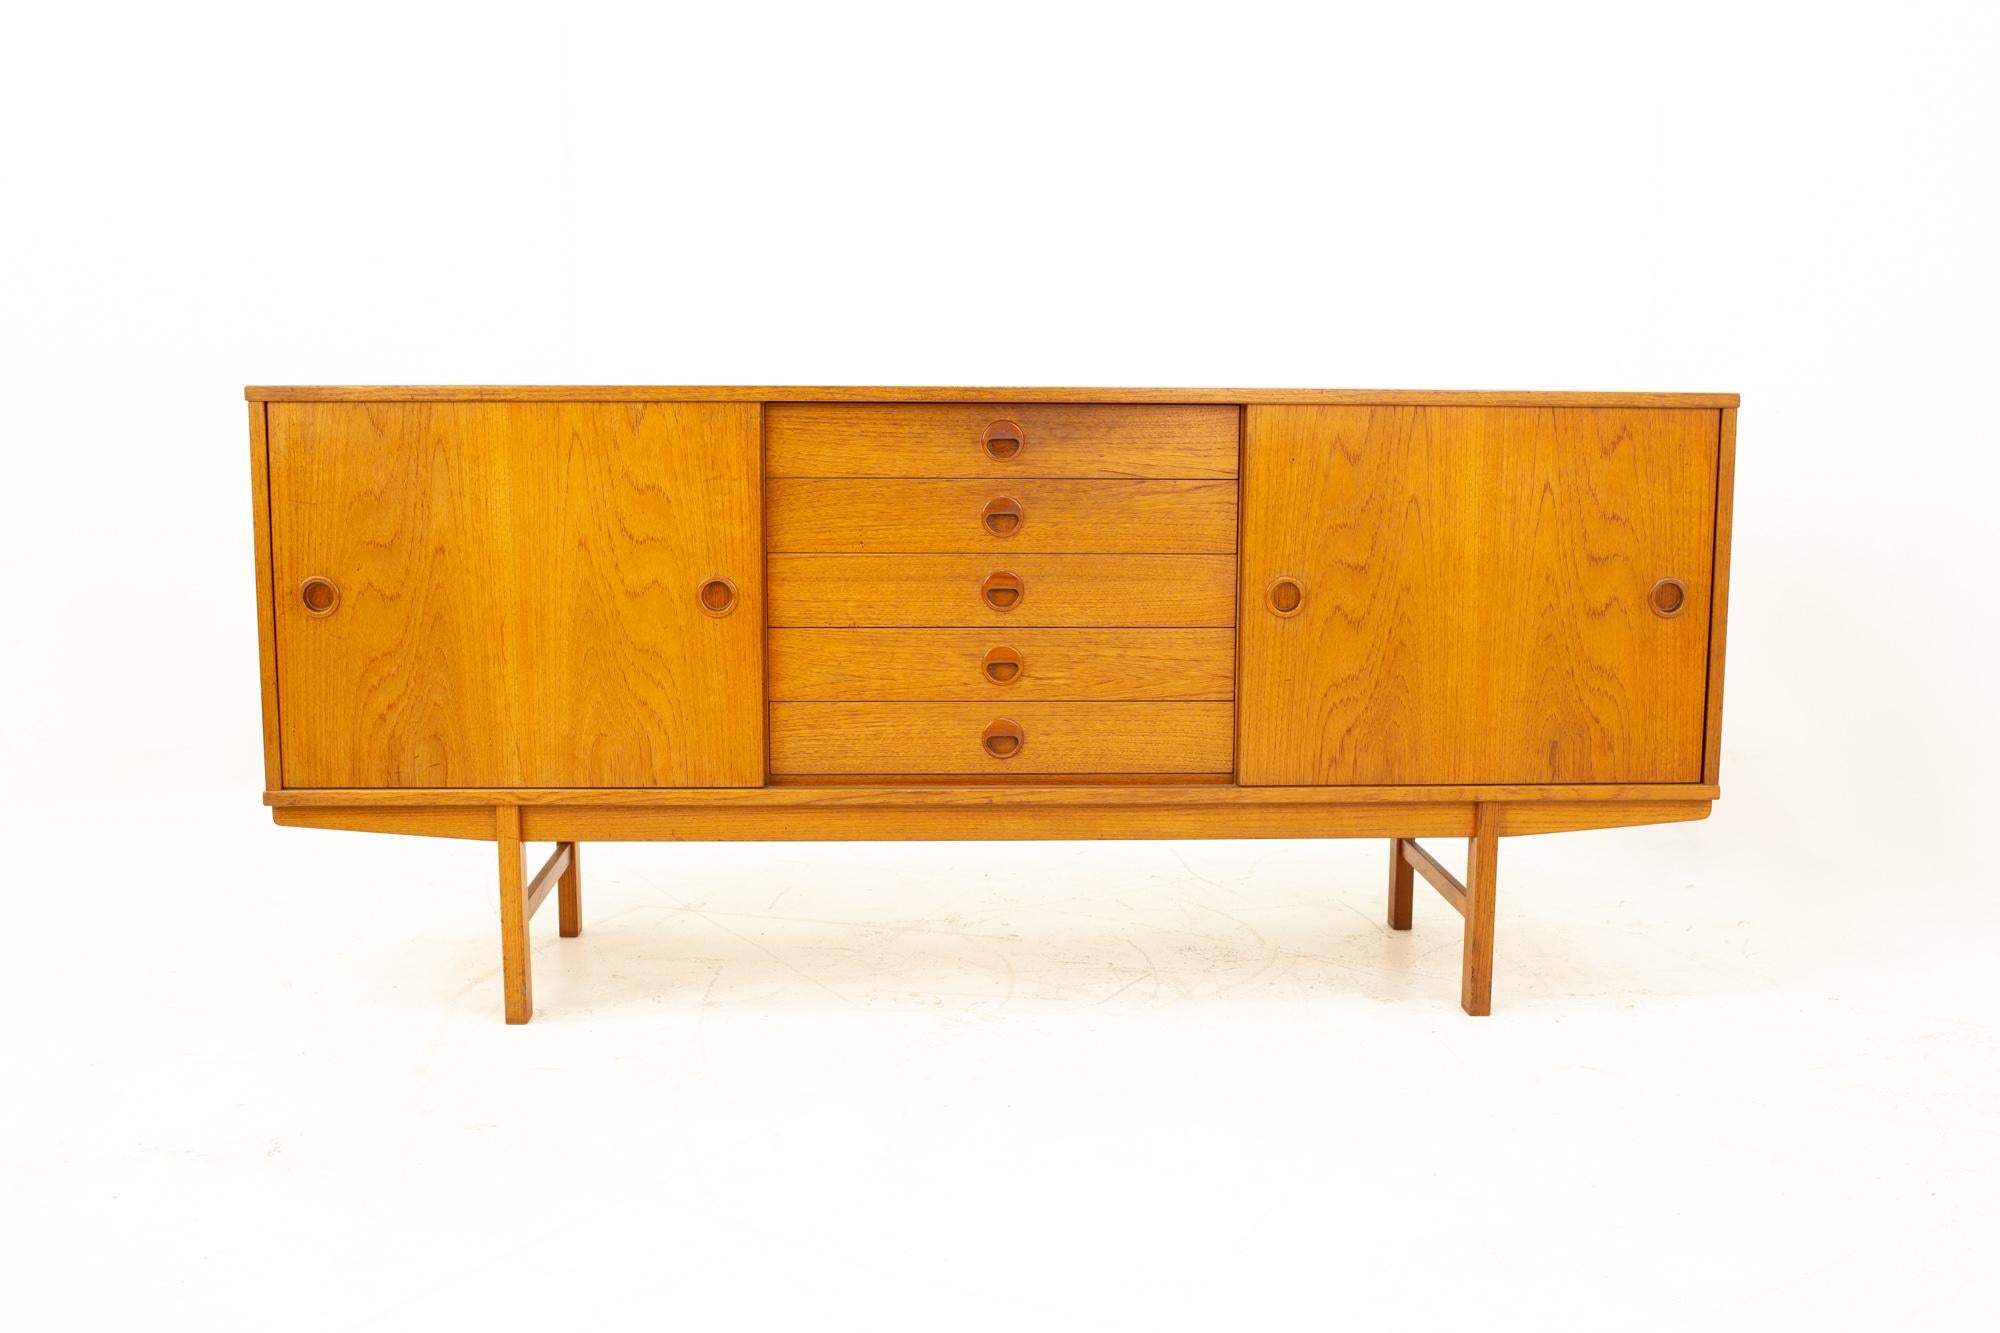 DUX midcentury credenza
Credenza measures: 71 wide x 18.5 deep x 31 high
This price includes getting this piece in what we call restored vintage condition. That means the piece is permanently fixed upon purchase so it’s free of watermarks, chips,